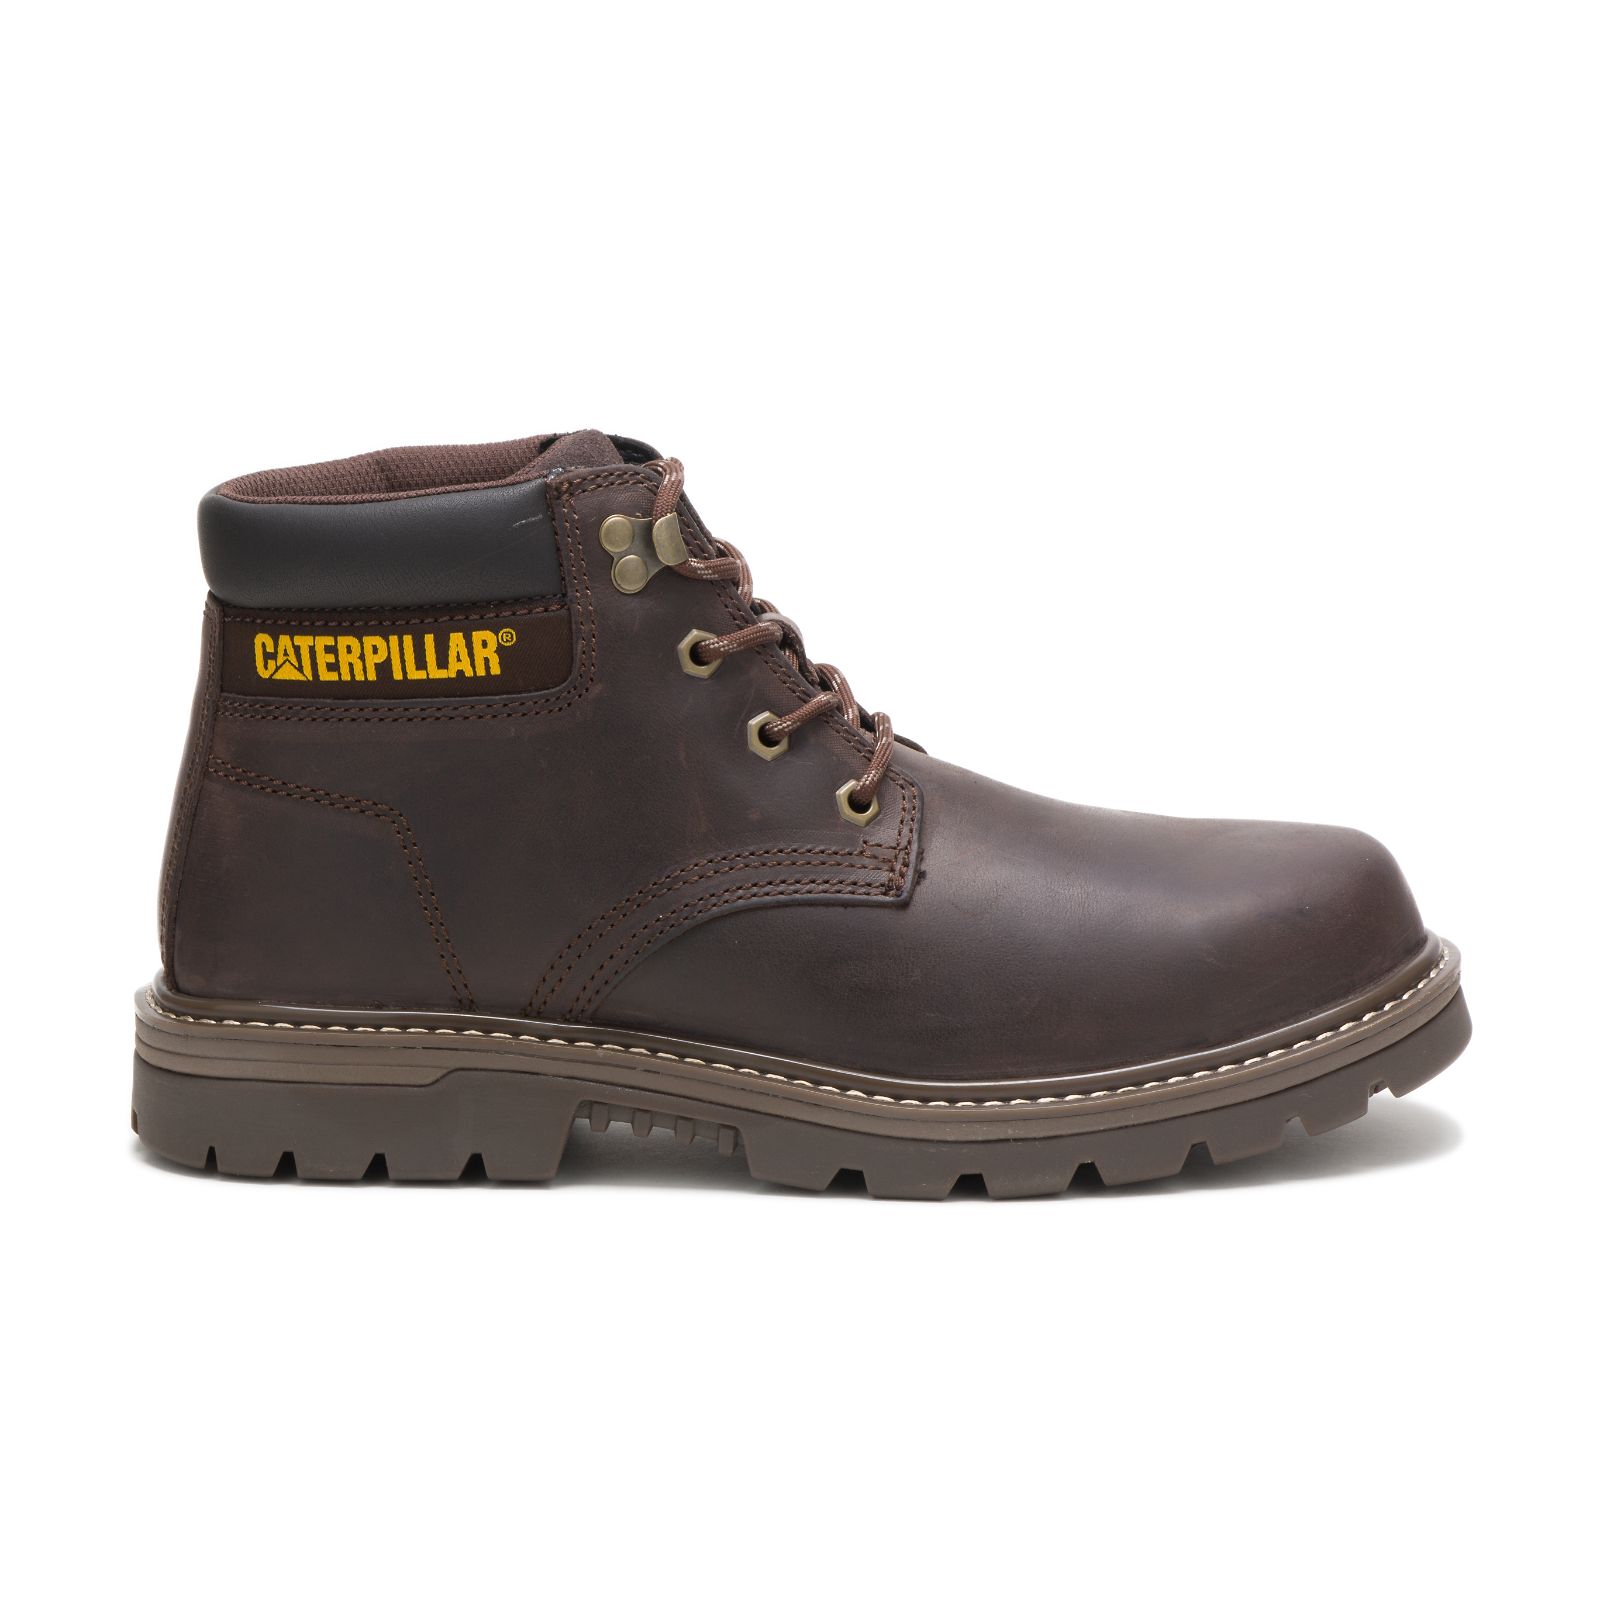 Caterpillar Boots Lahore - Caterpillar Outbase Steel Toe Mens Work Boots Coffee (394681-SCP)